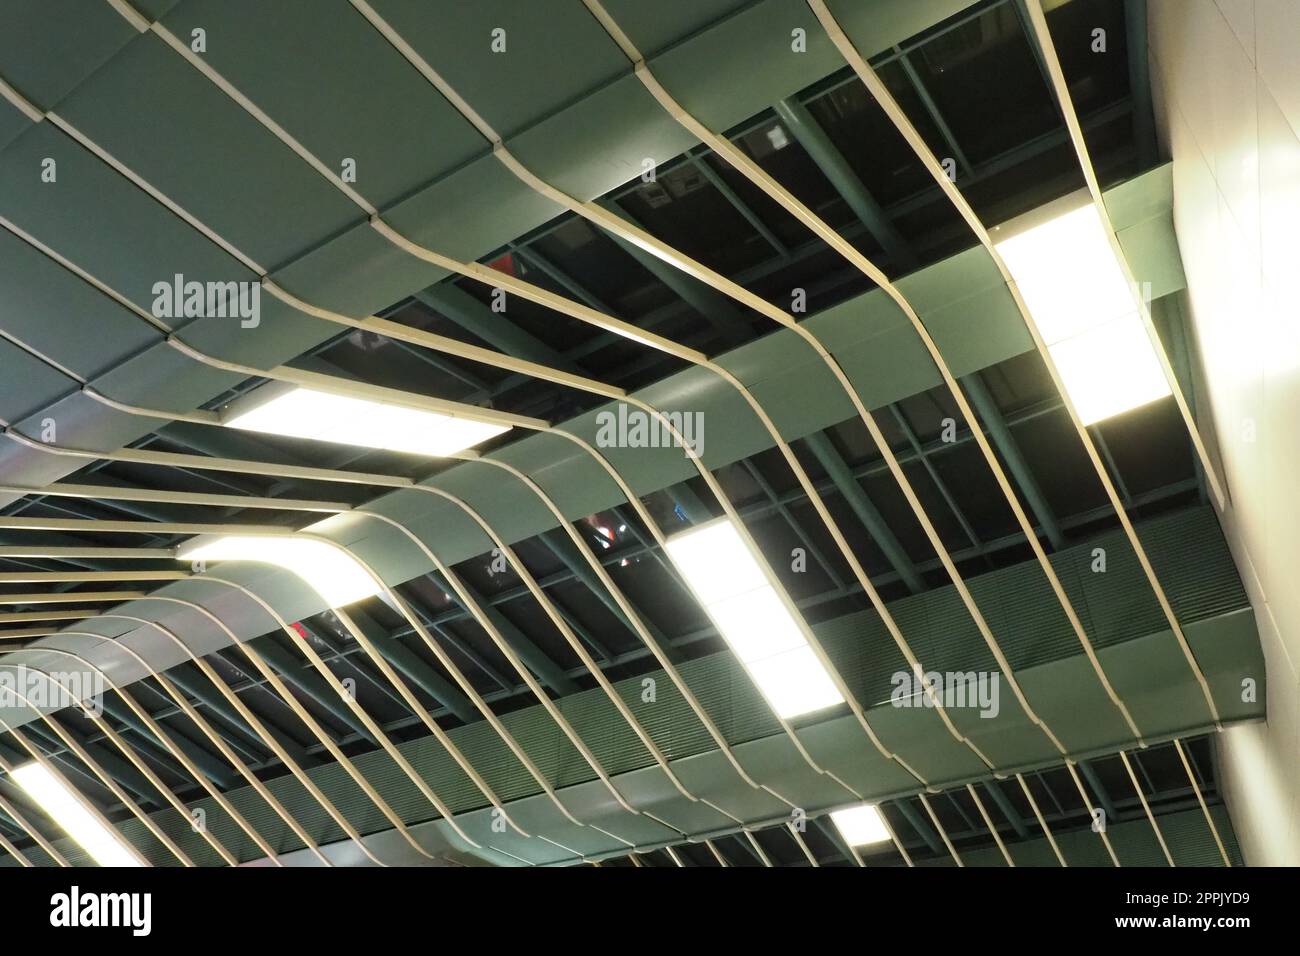 Metal structures under the ceiling. Decorative details of the airport ceiling . Concrete beams, glass lusters and metal elements as public building interior design. Abstract avant-garde architecture. Stock Photo